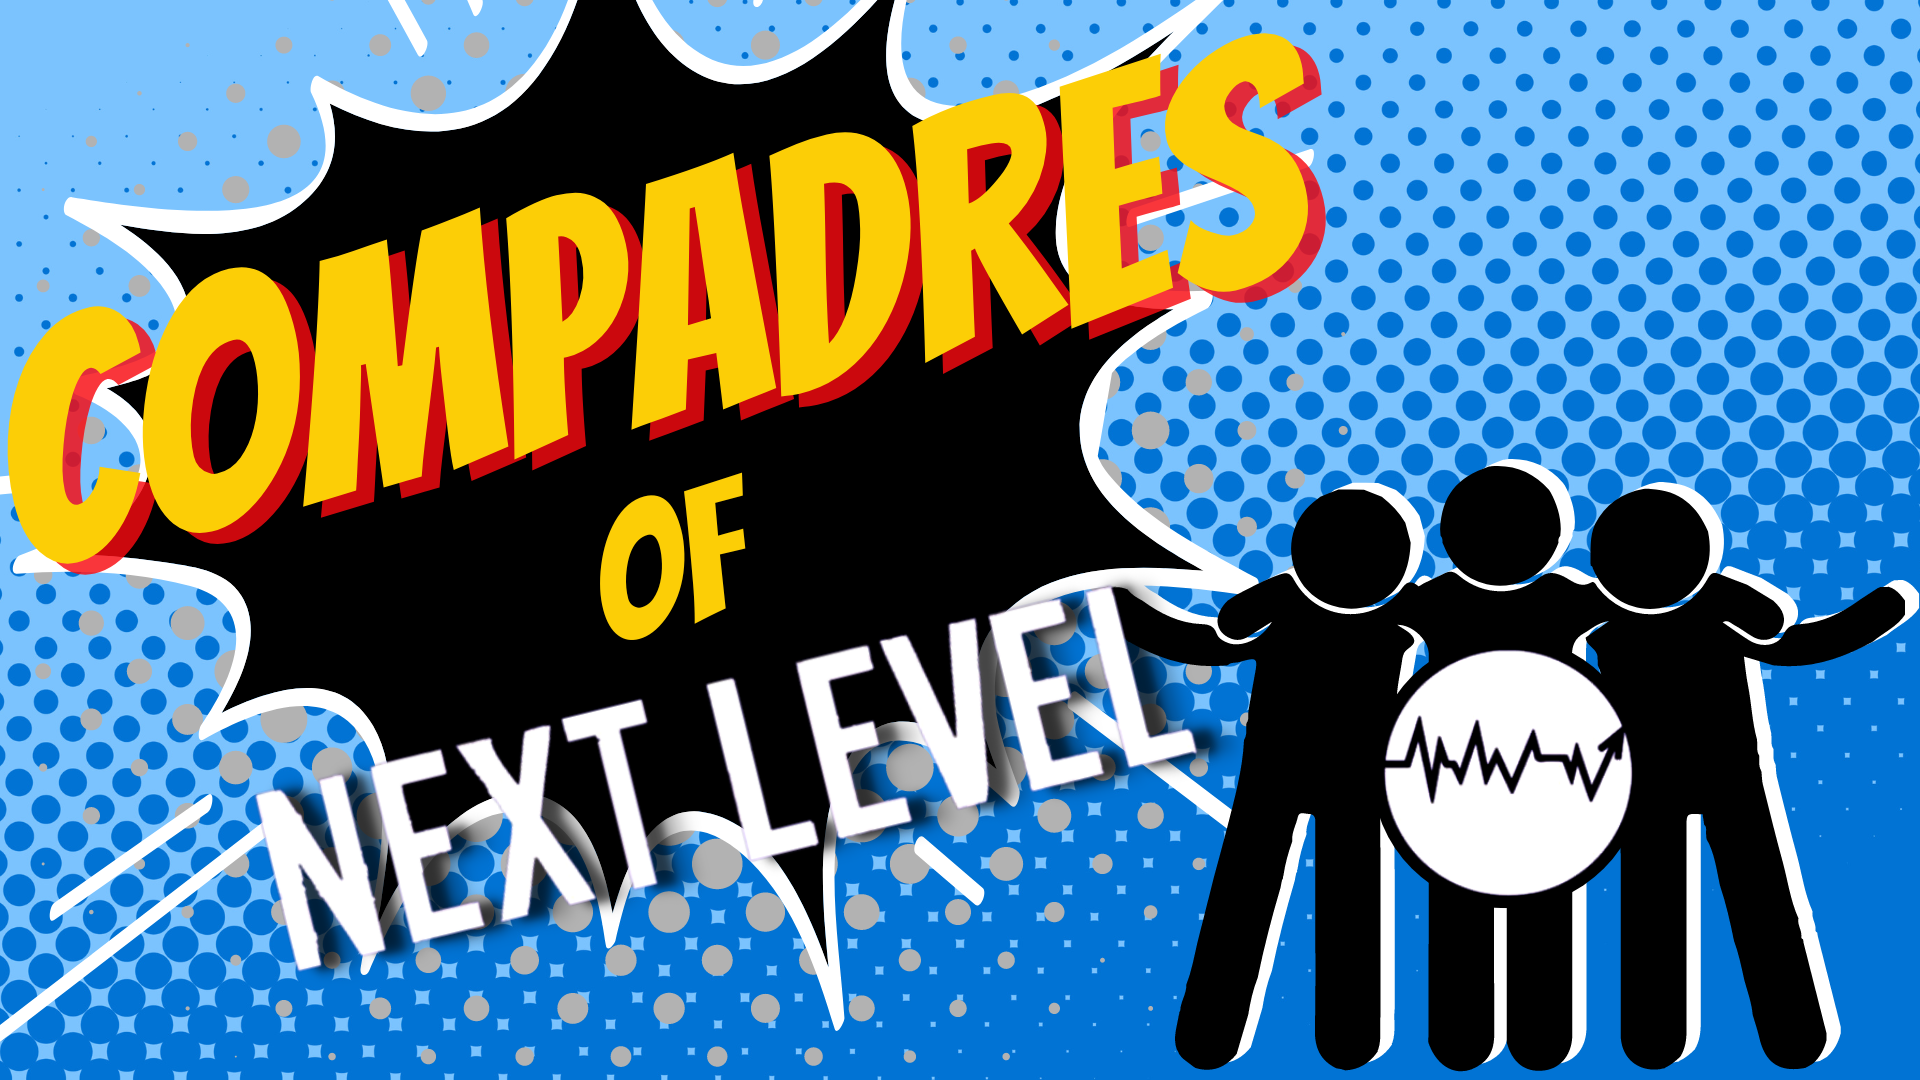 Compadres of Next Level, Week 5